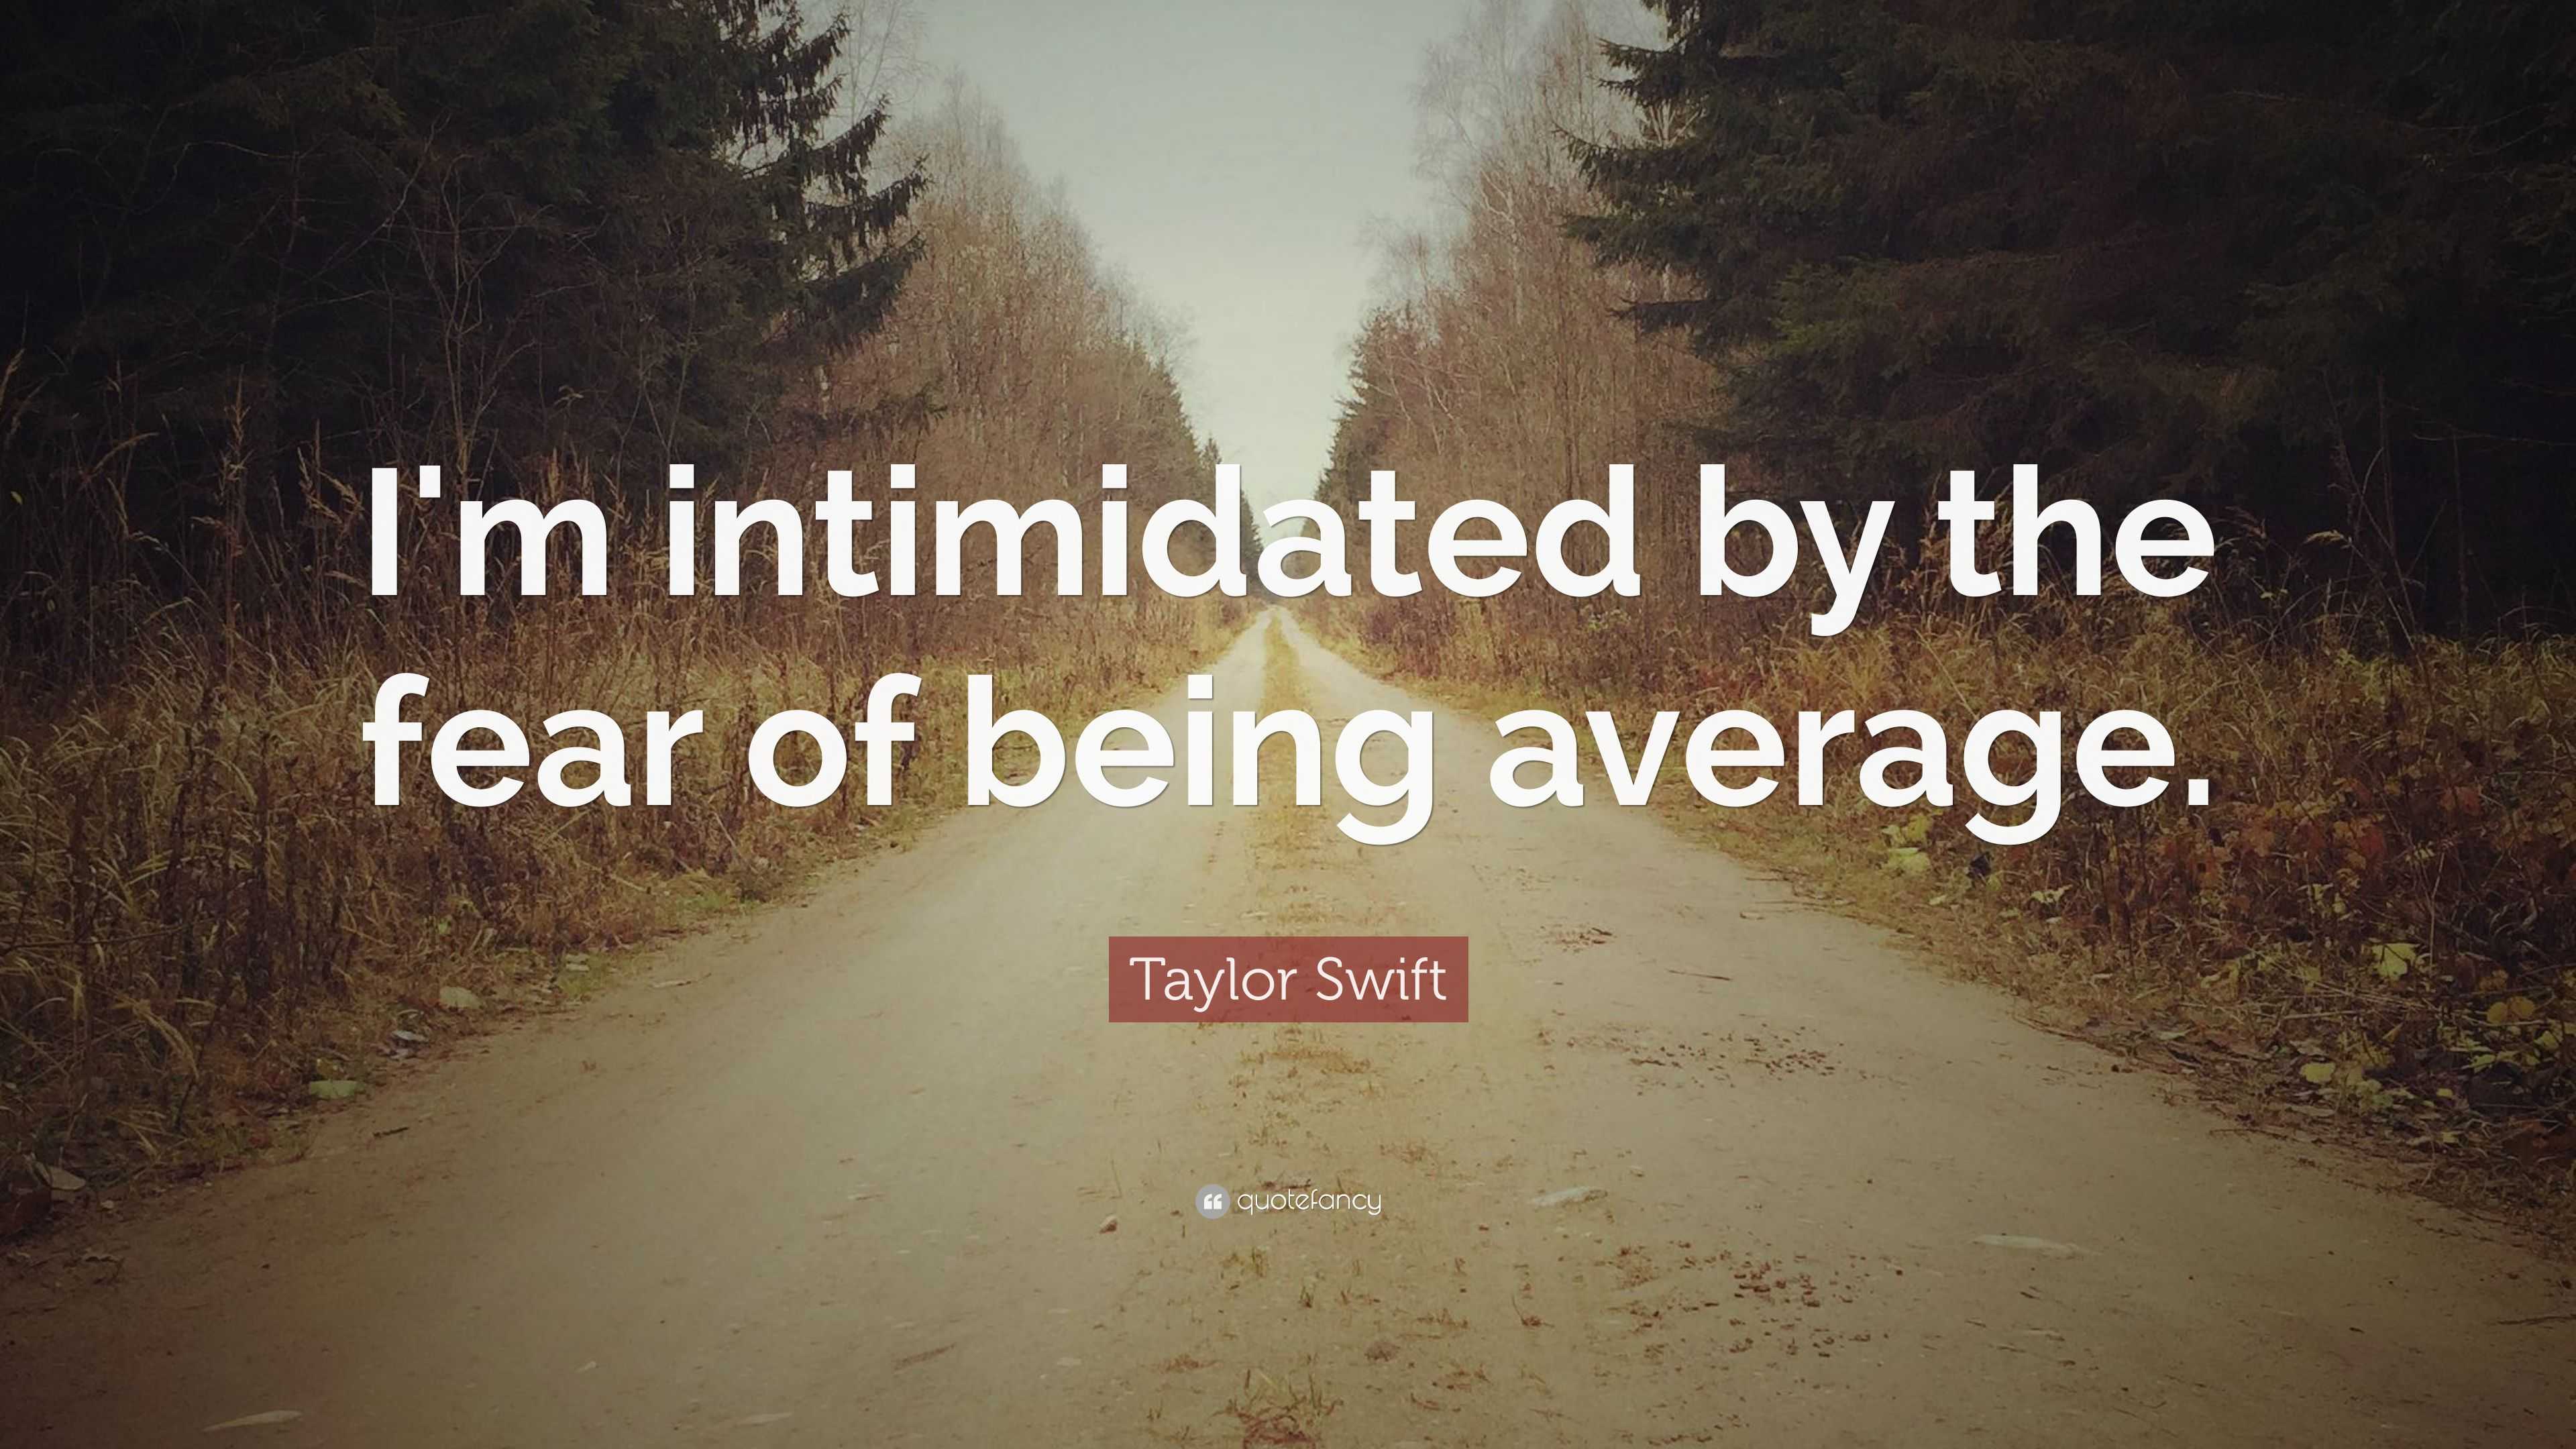 Taylor Swift Quote “I m intimidated by the fear of being average